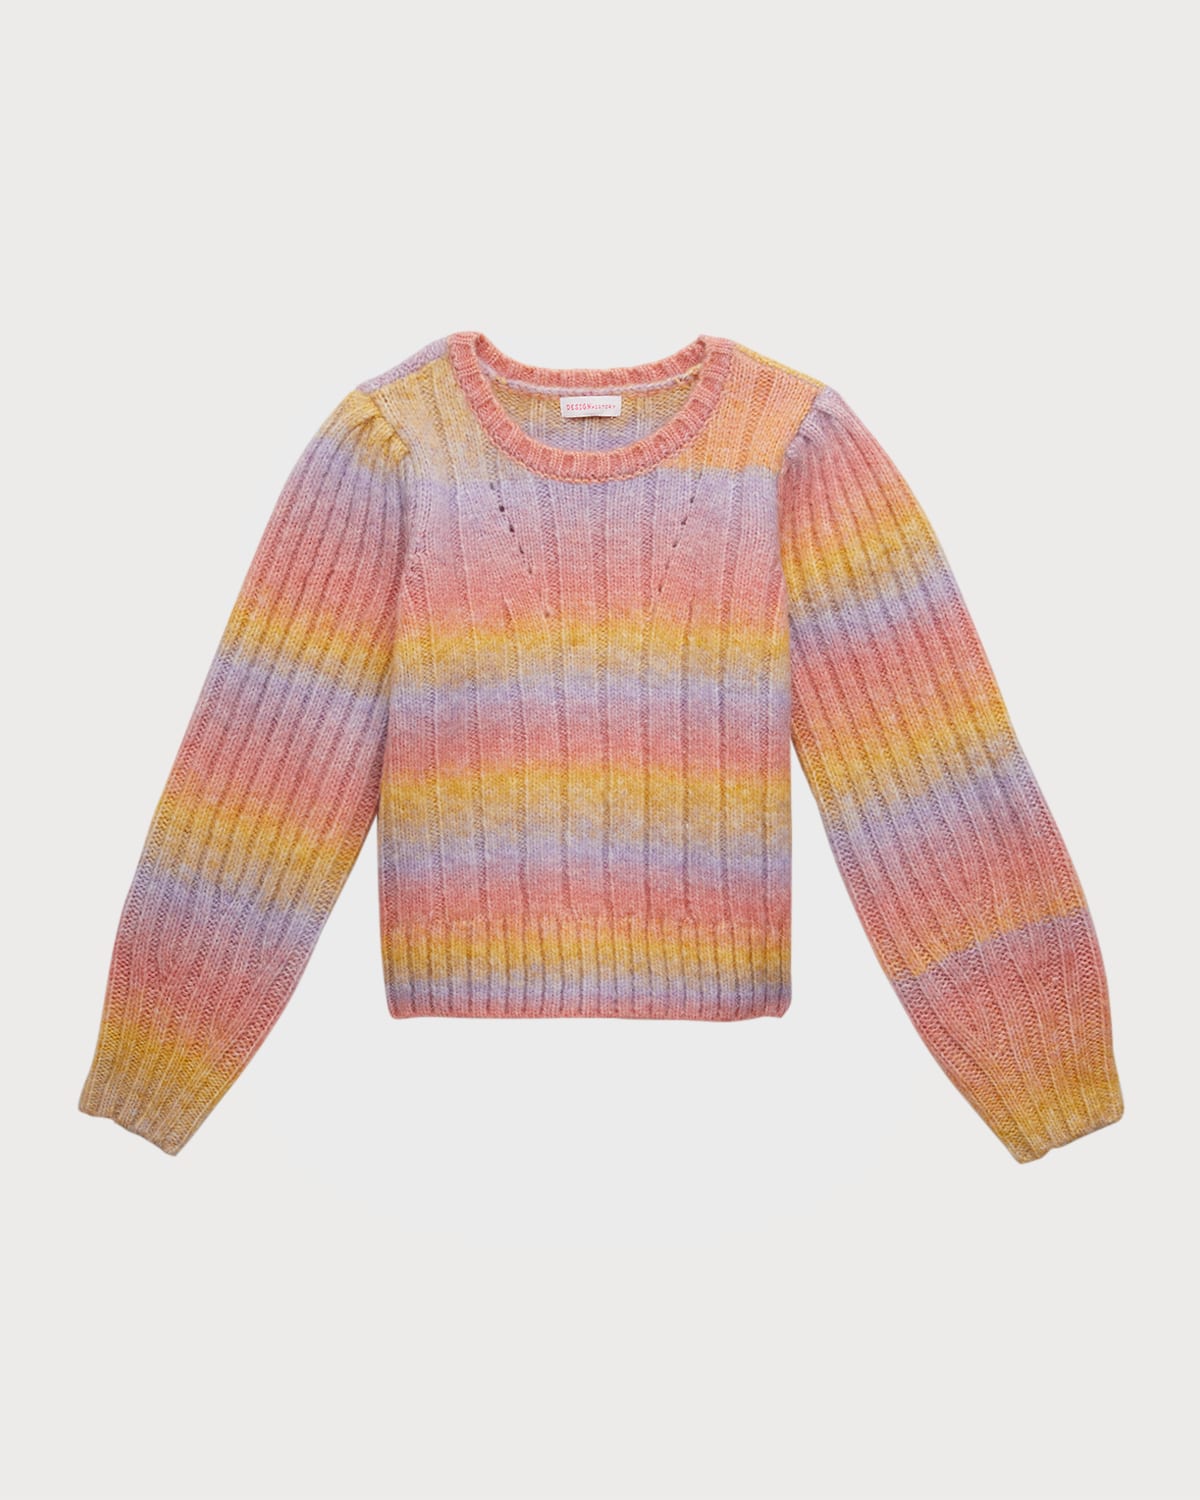 Girl's Textured Rainbow Pullover Sweater, Size S-XL